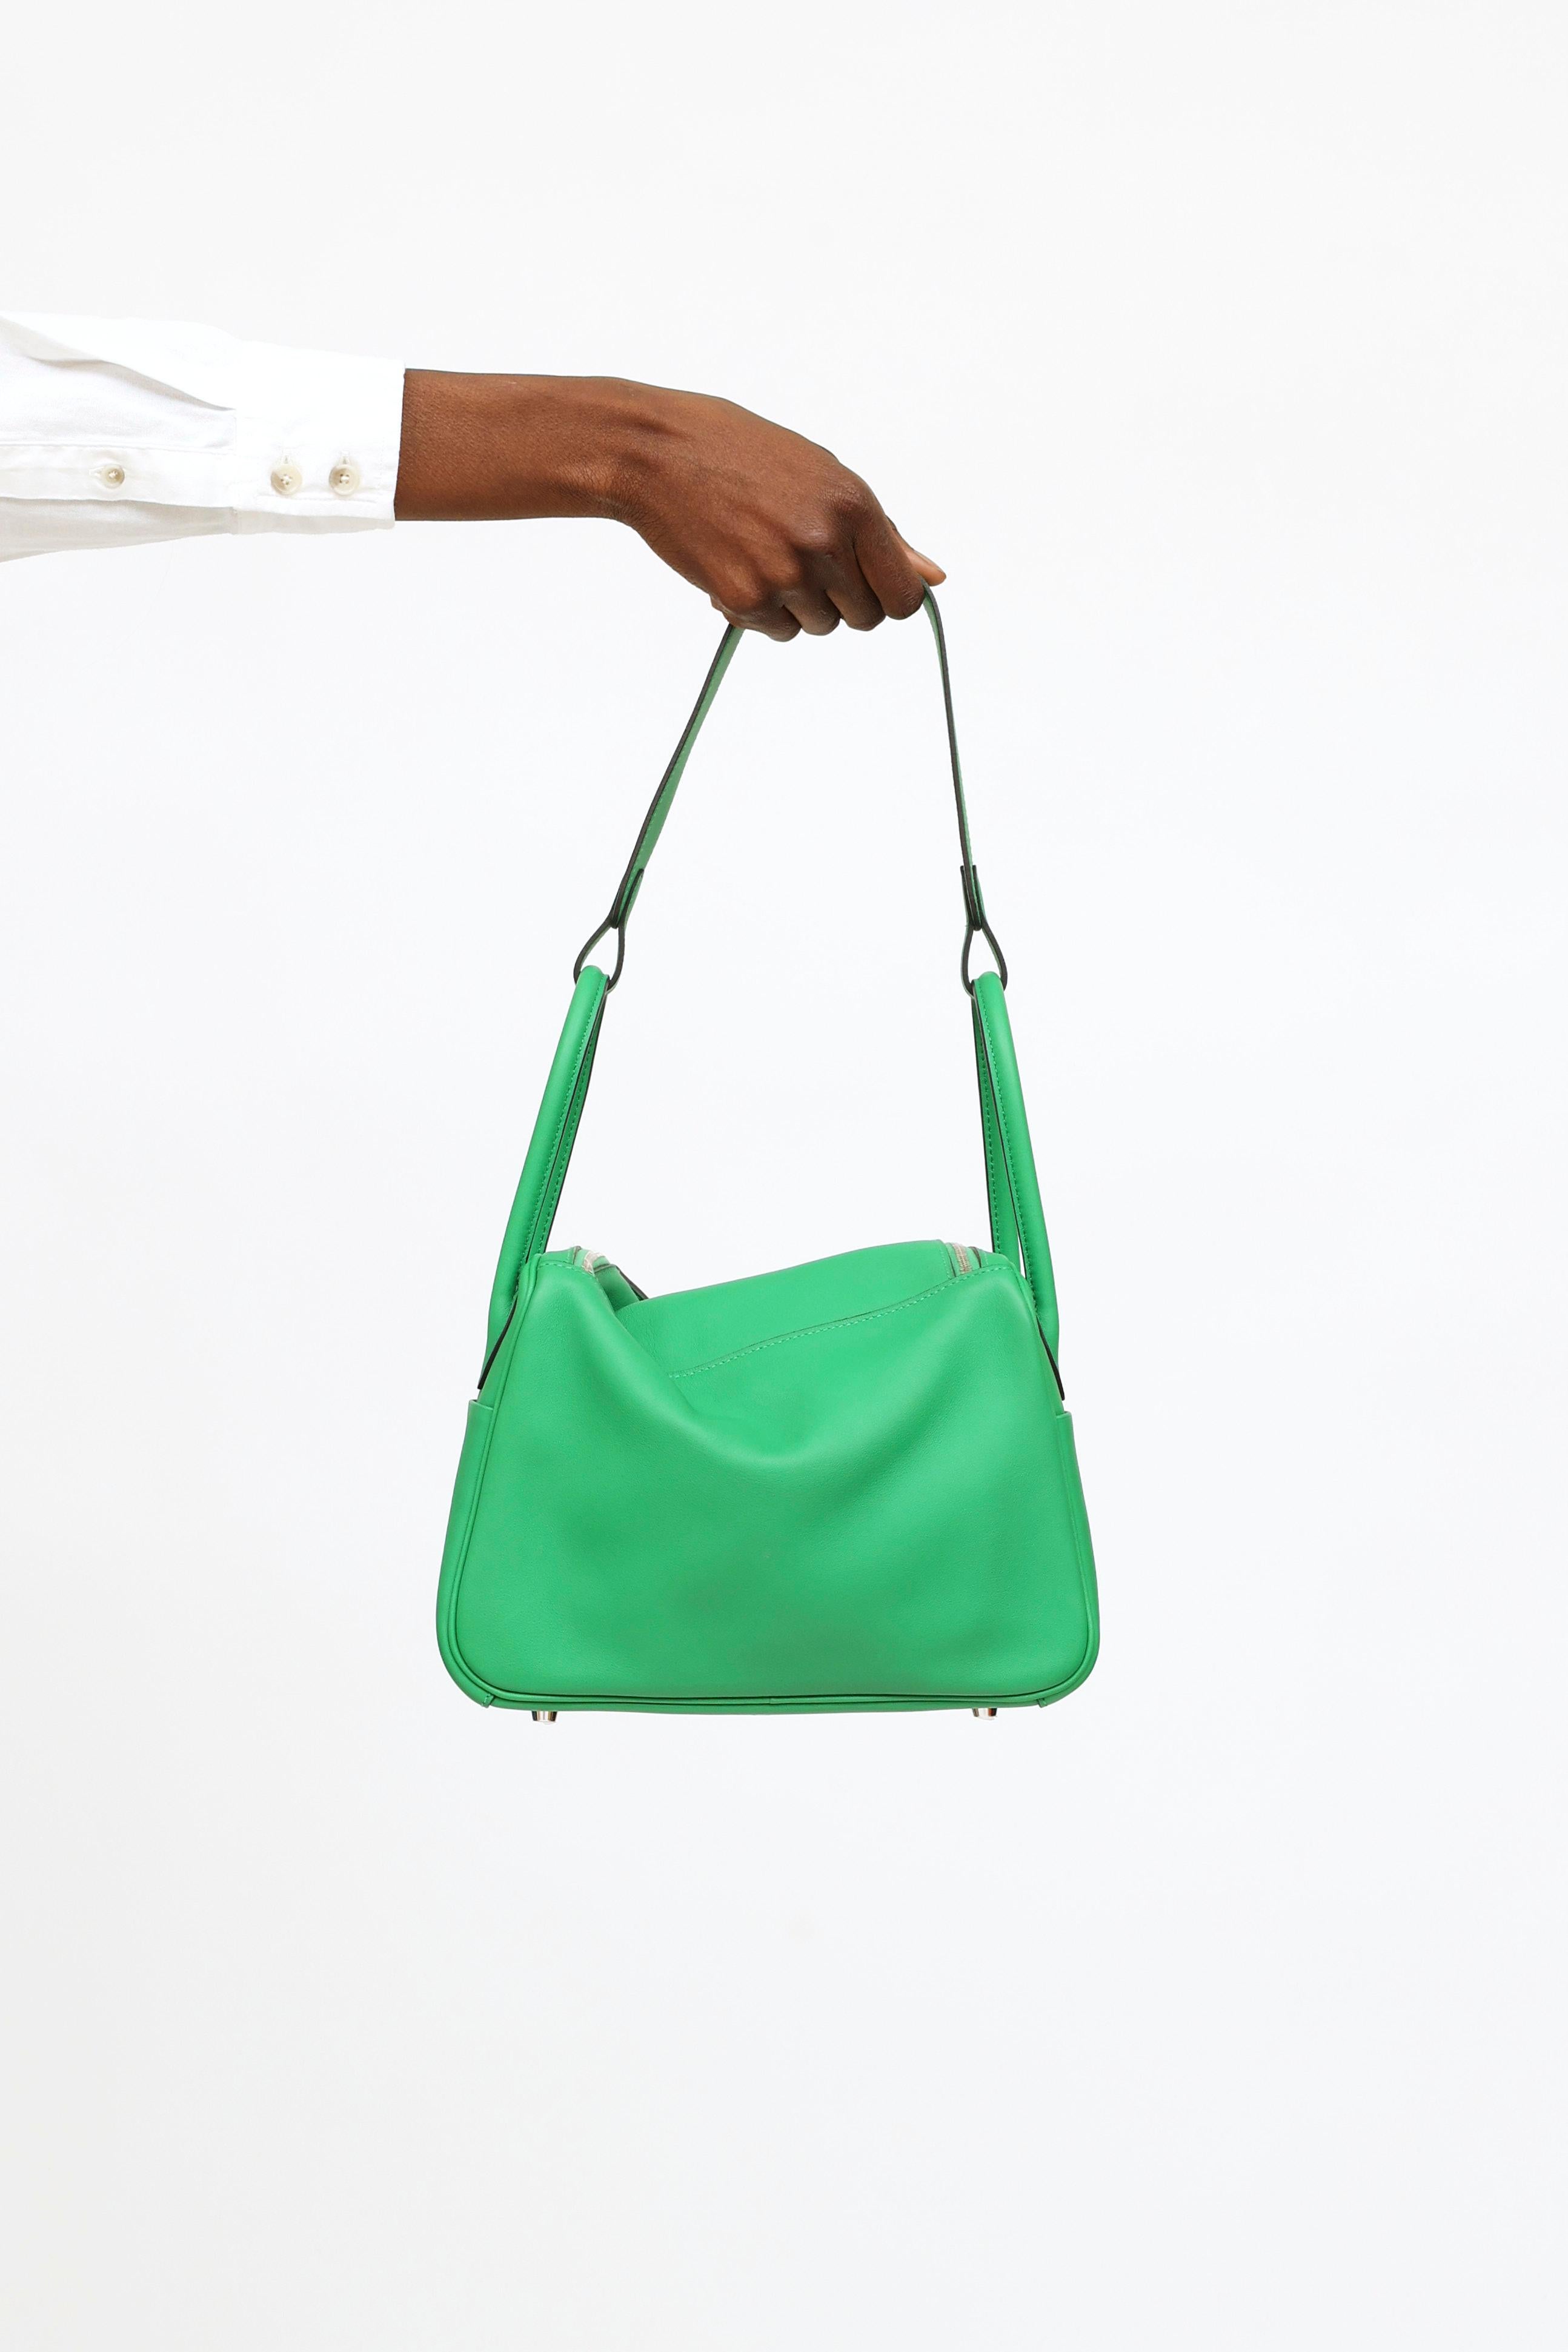 2014 Hermès Green Bamboo Swift Lindy 26 Bag In Excellent Condition For Sale In Toronto, ON